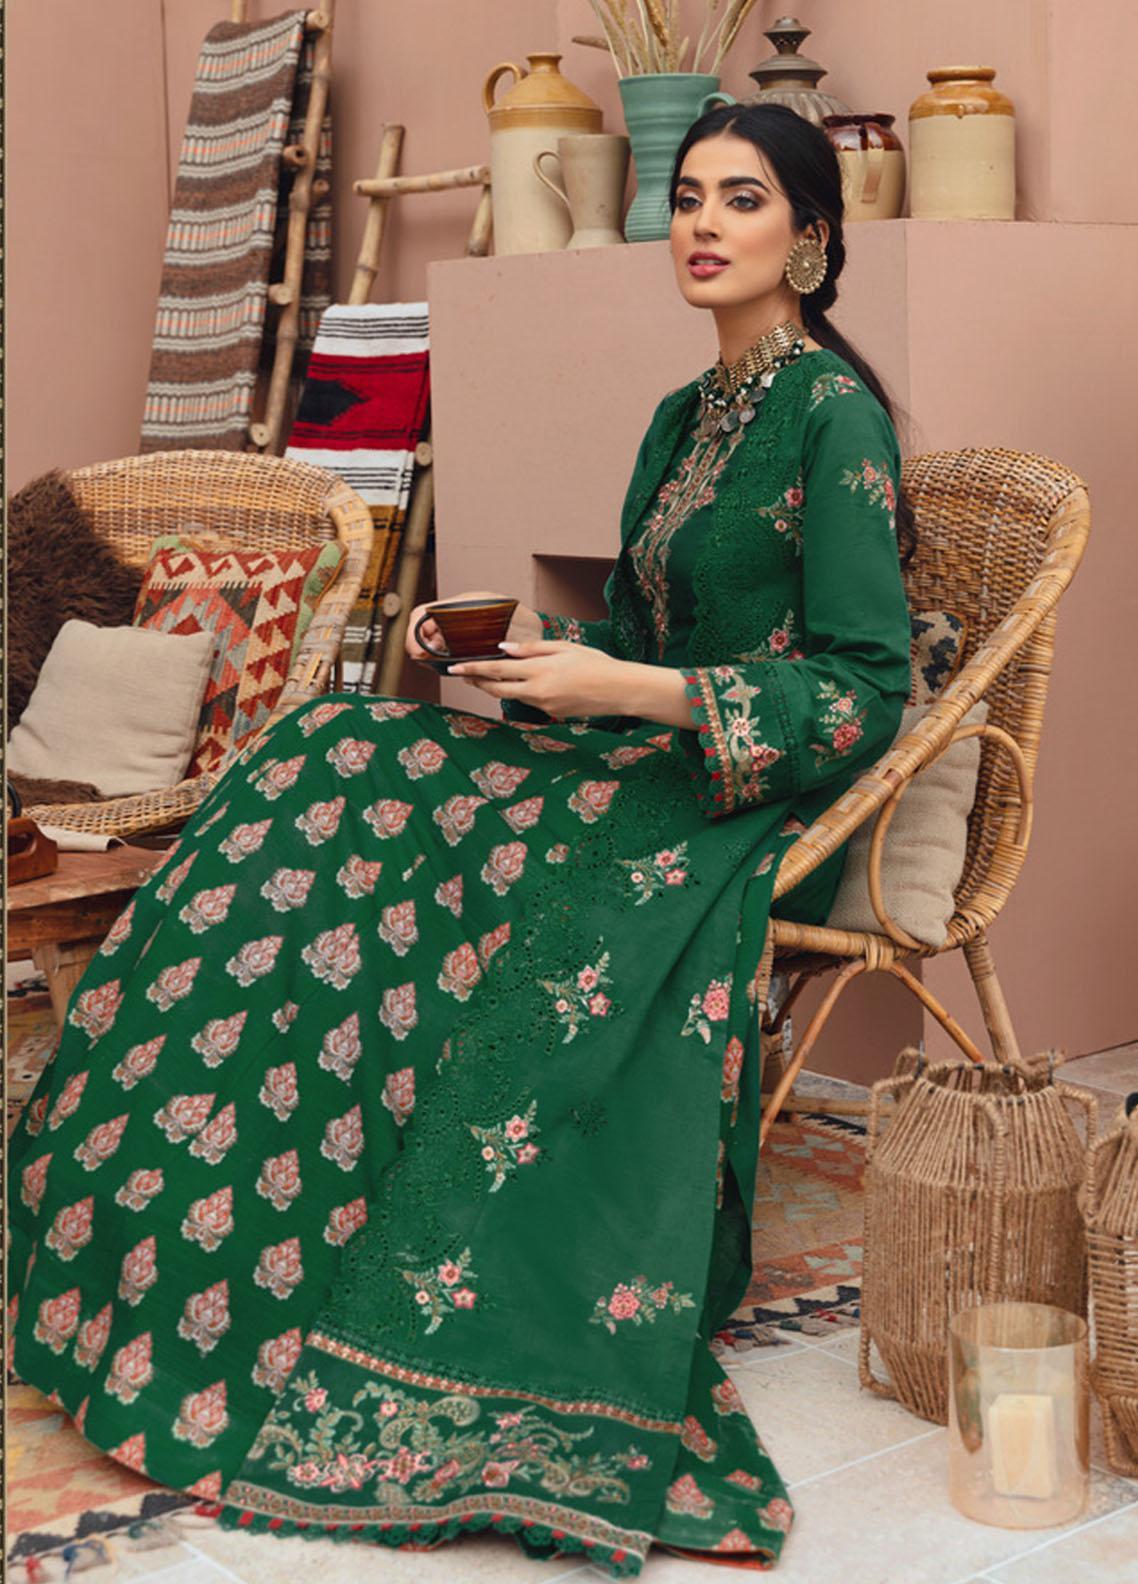 Noor by Saadia Asad Embroidered Khaddar Suit Unstitched 3 Piece 03 – Winter Collection